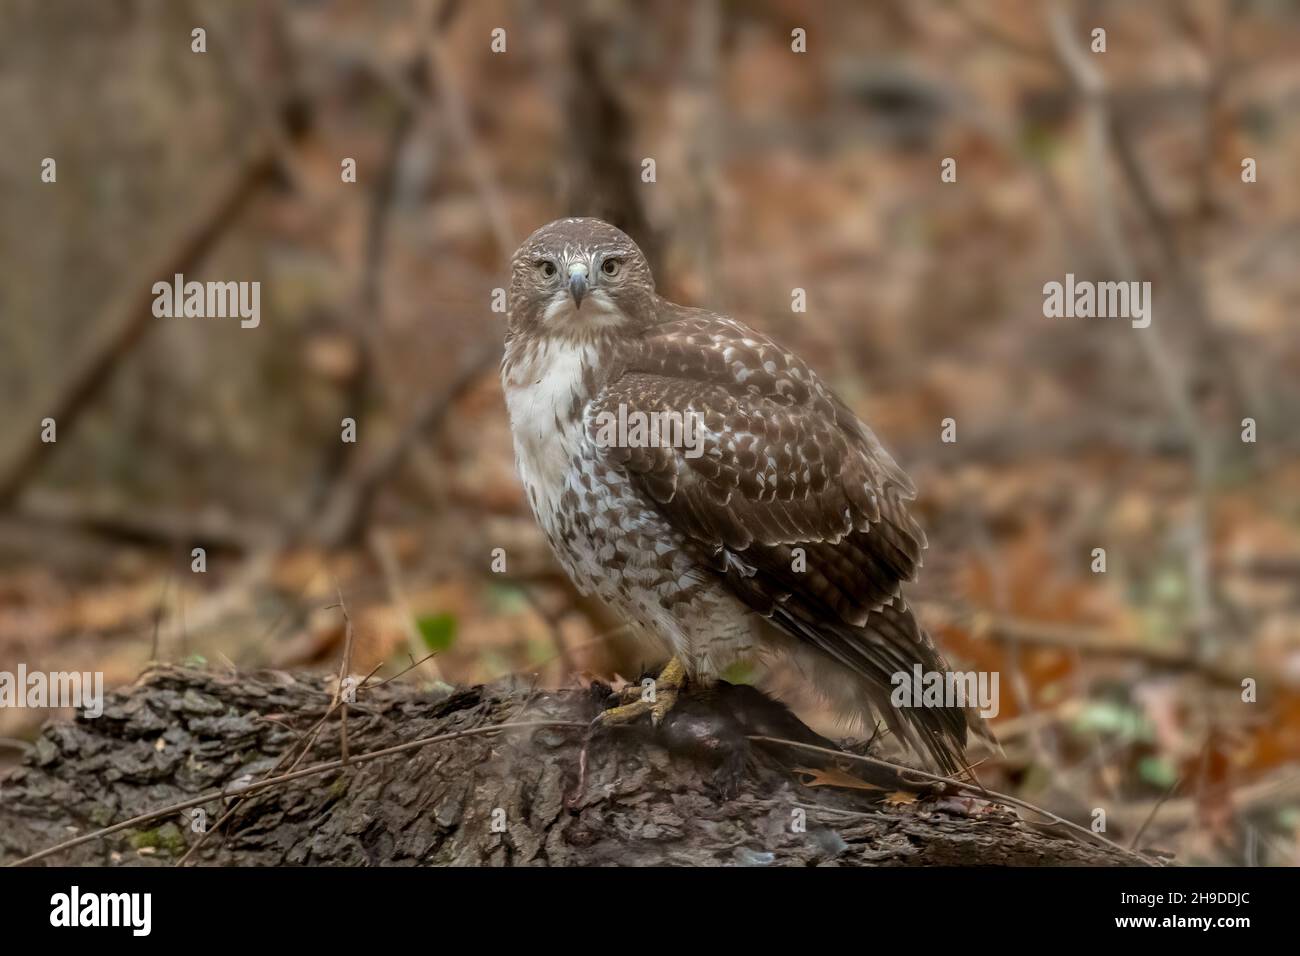 A Red-shouldered Hawk (Buteo lineatus) perched on a downed tree in a forest standing over its prey, a dead squirrel. Stock Photo